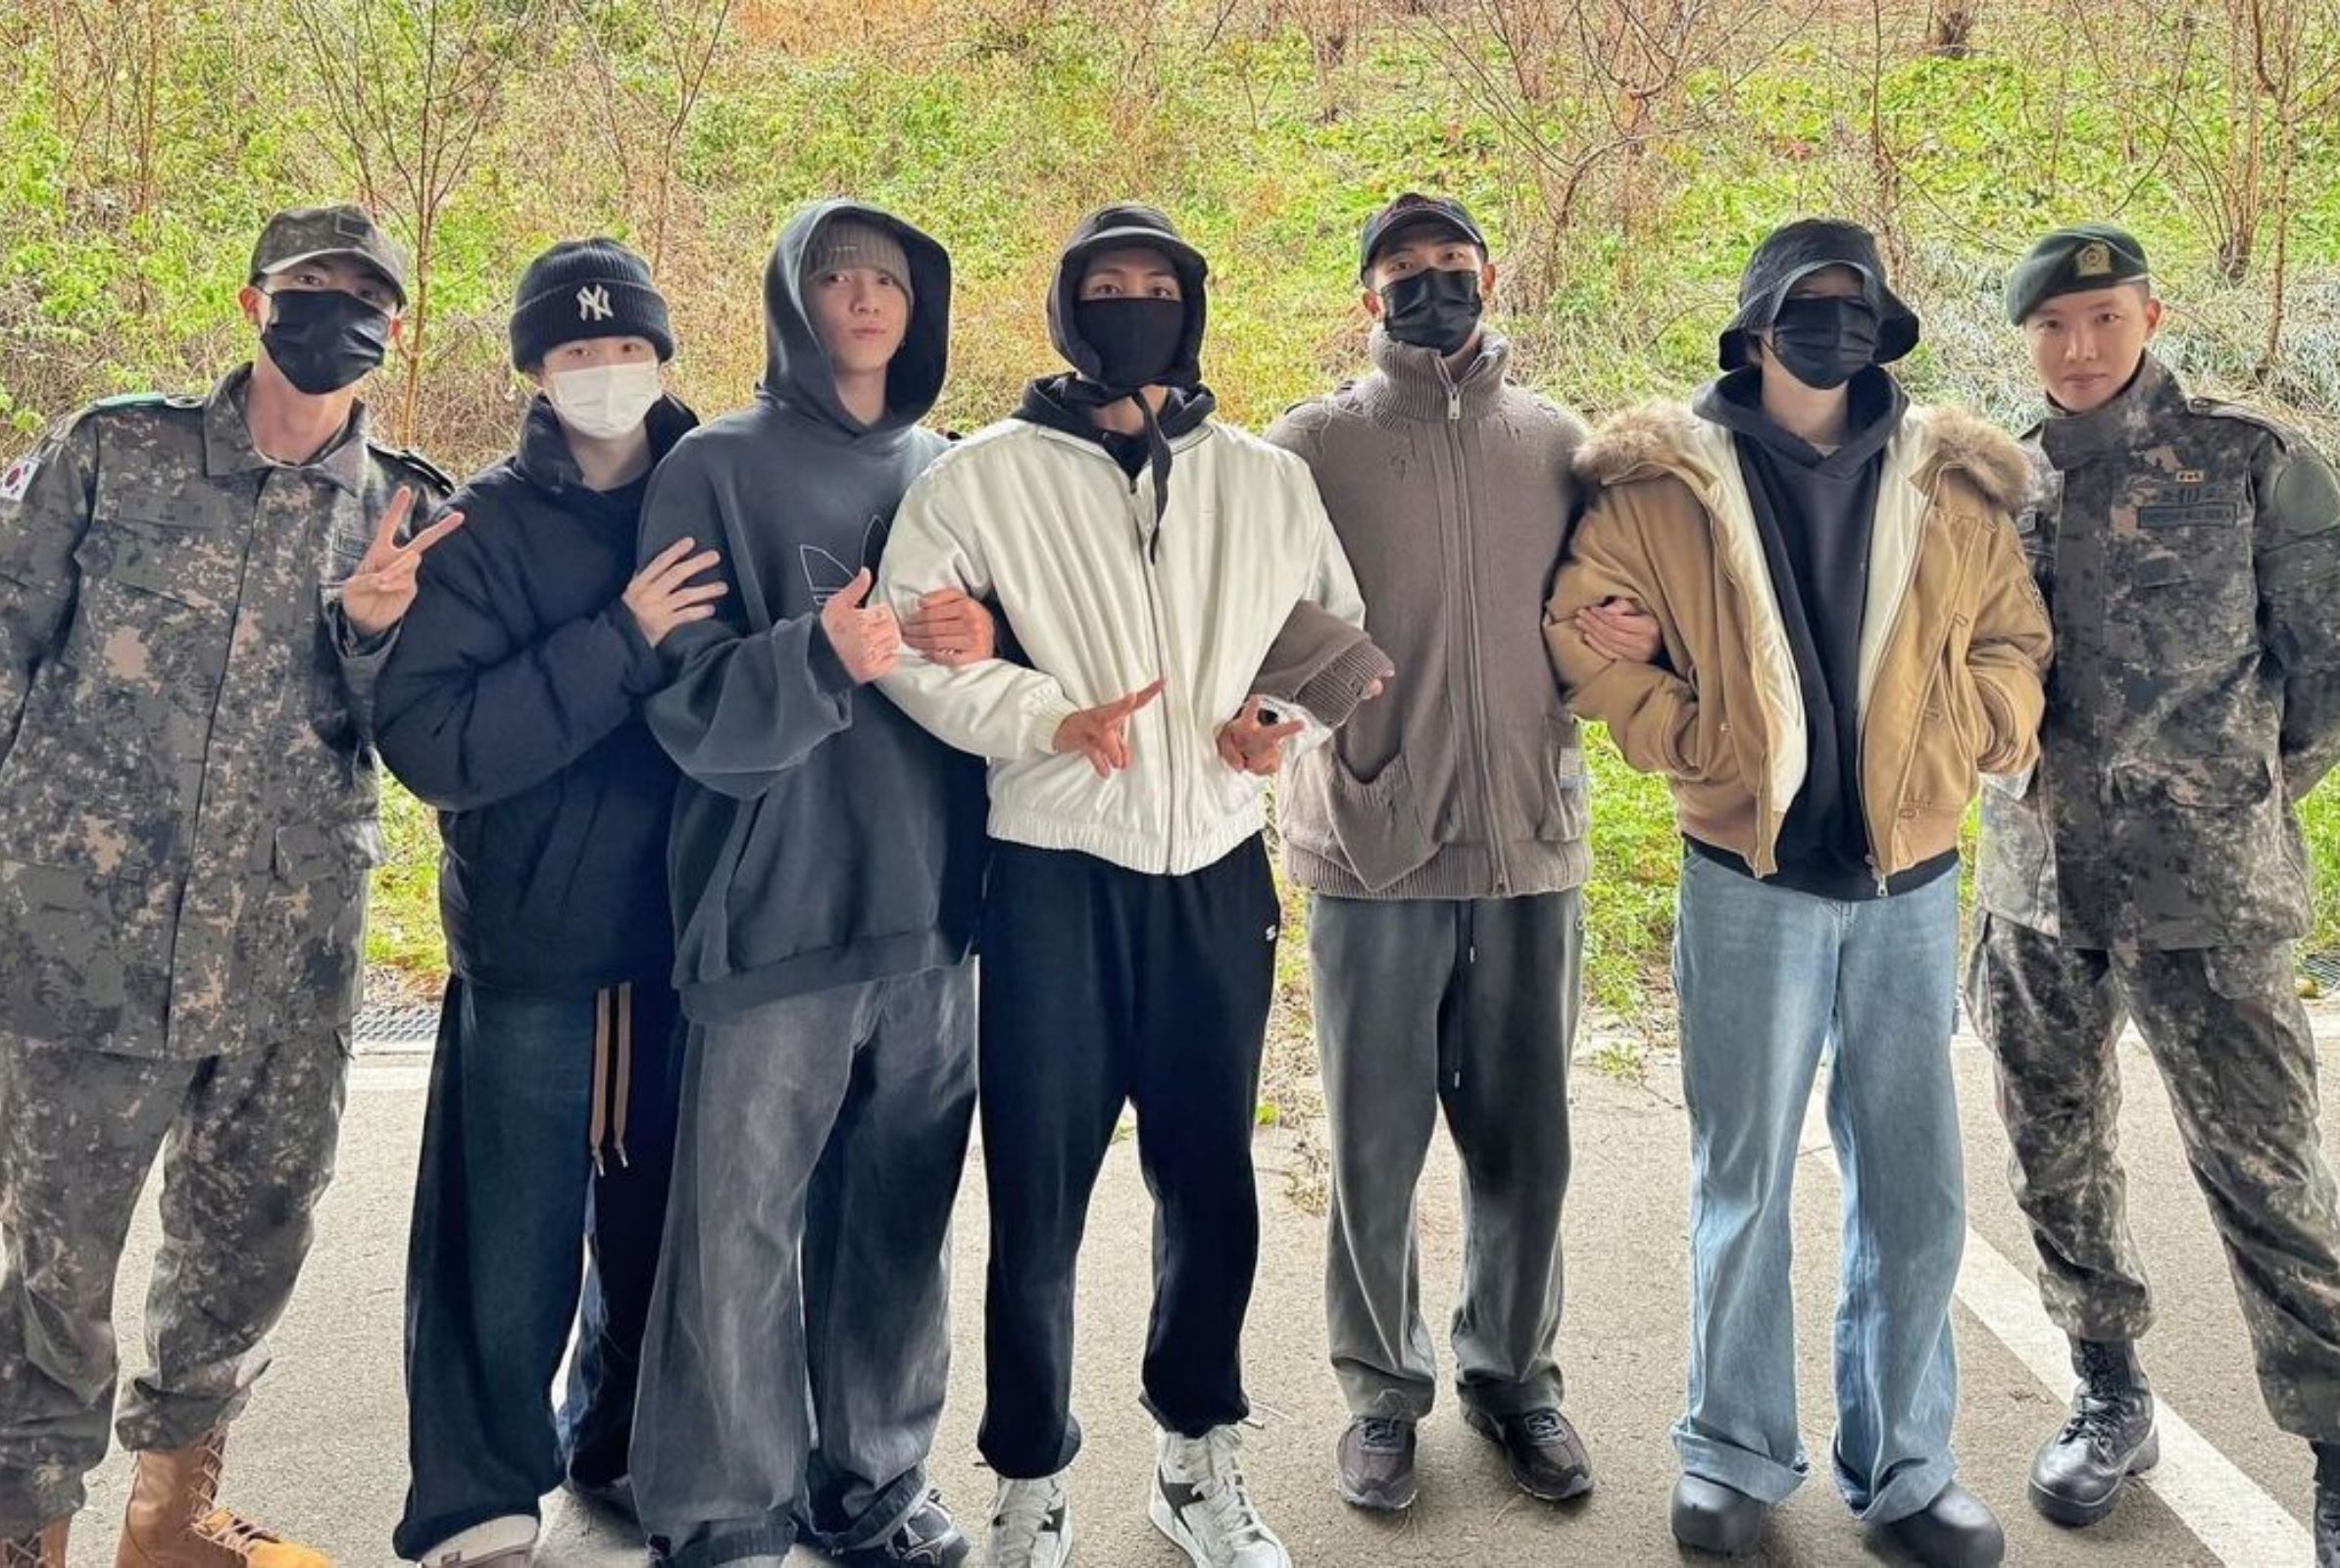 BTS joins the military